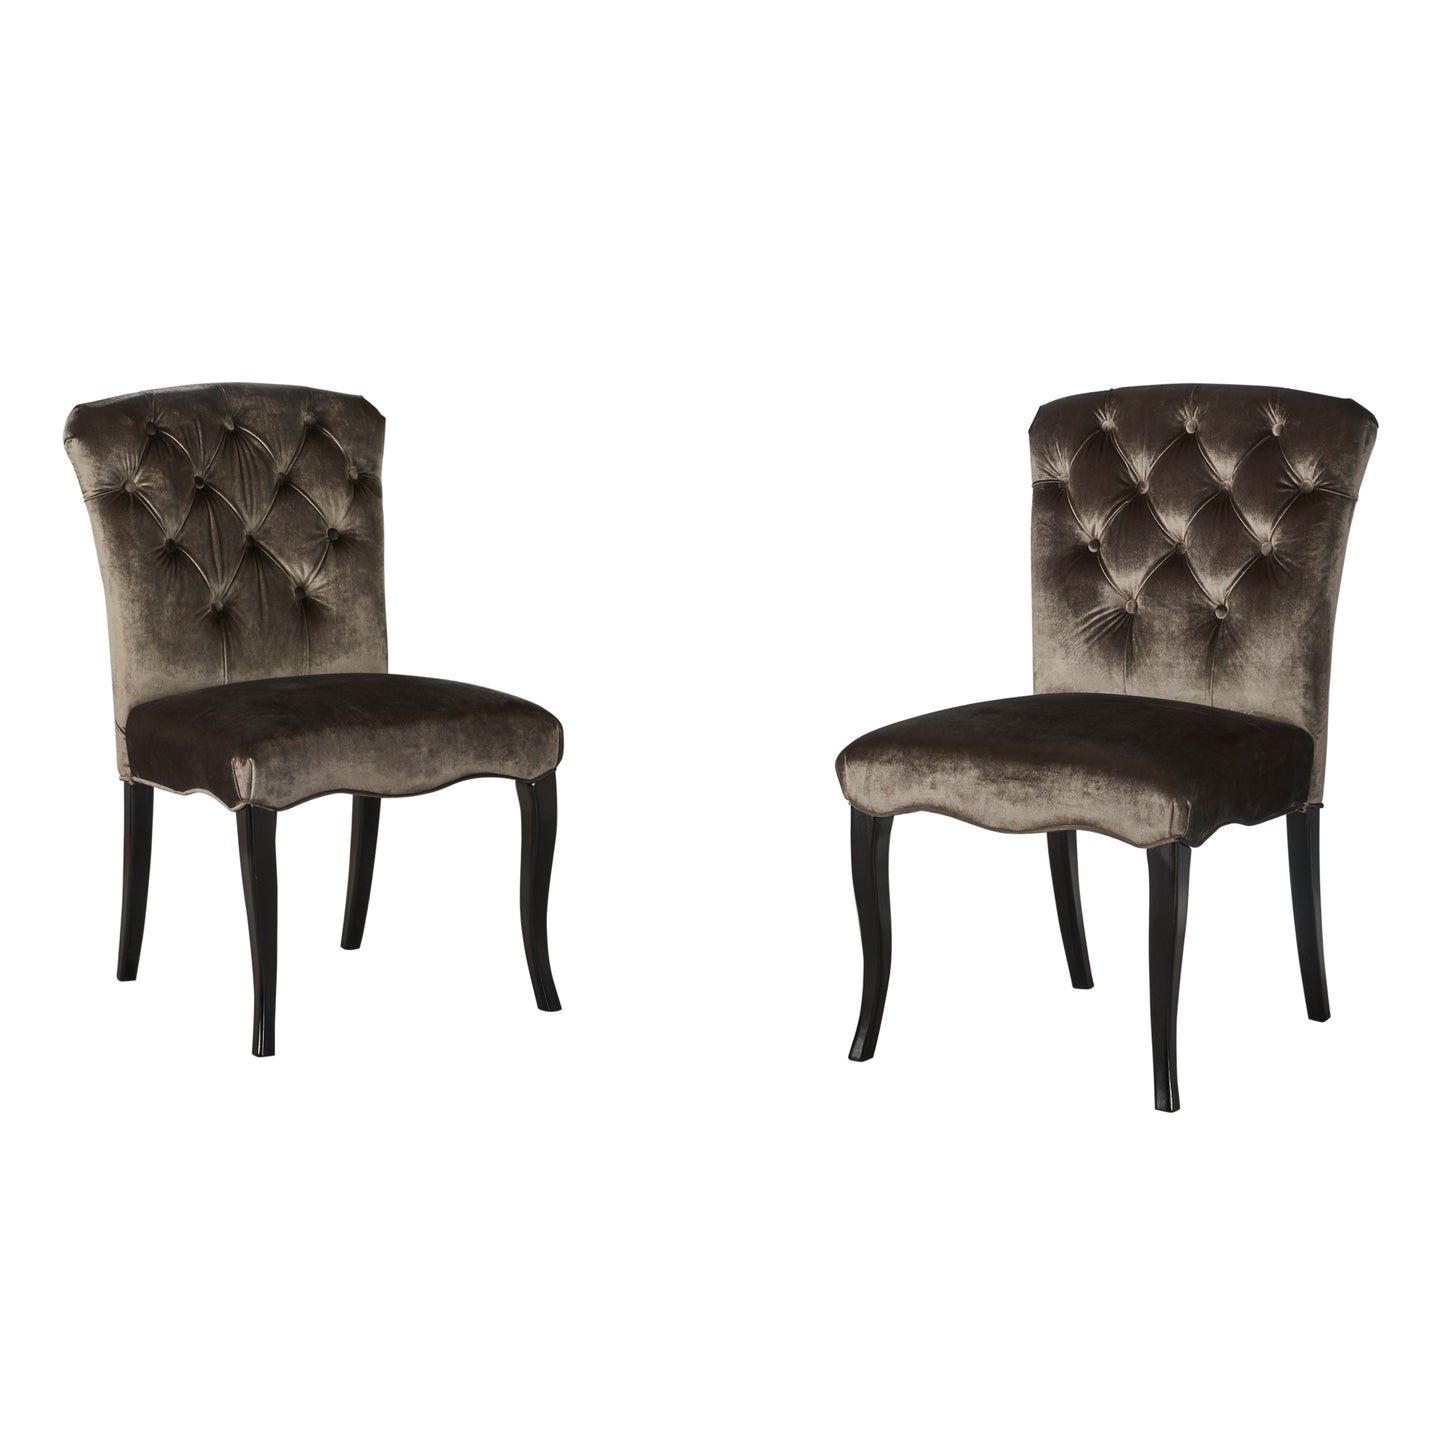 Hallie Traditional Tufted Armless Dining Chairs (Set of 2)